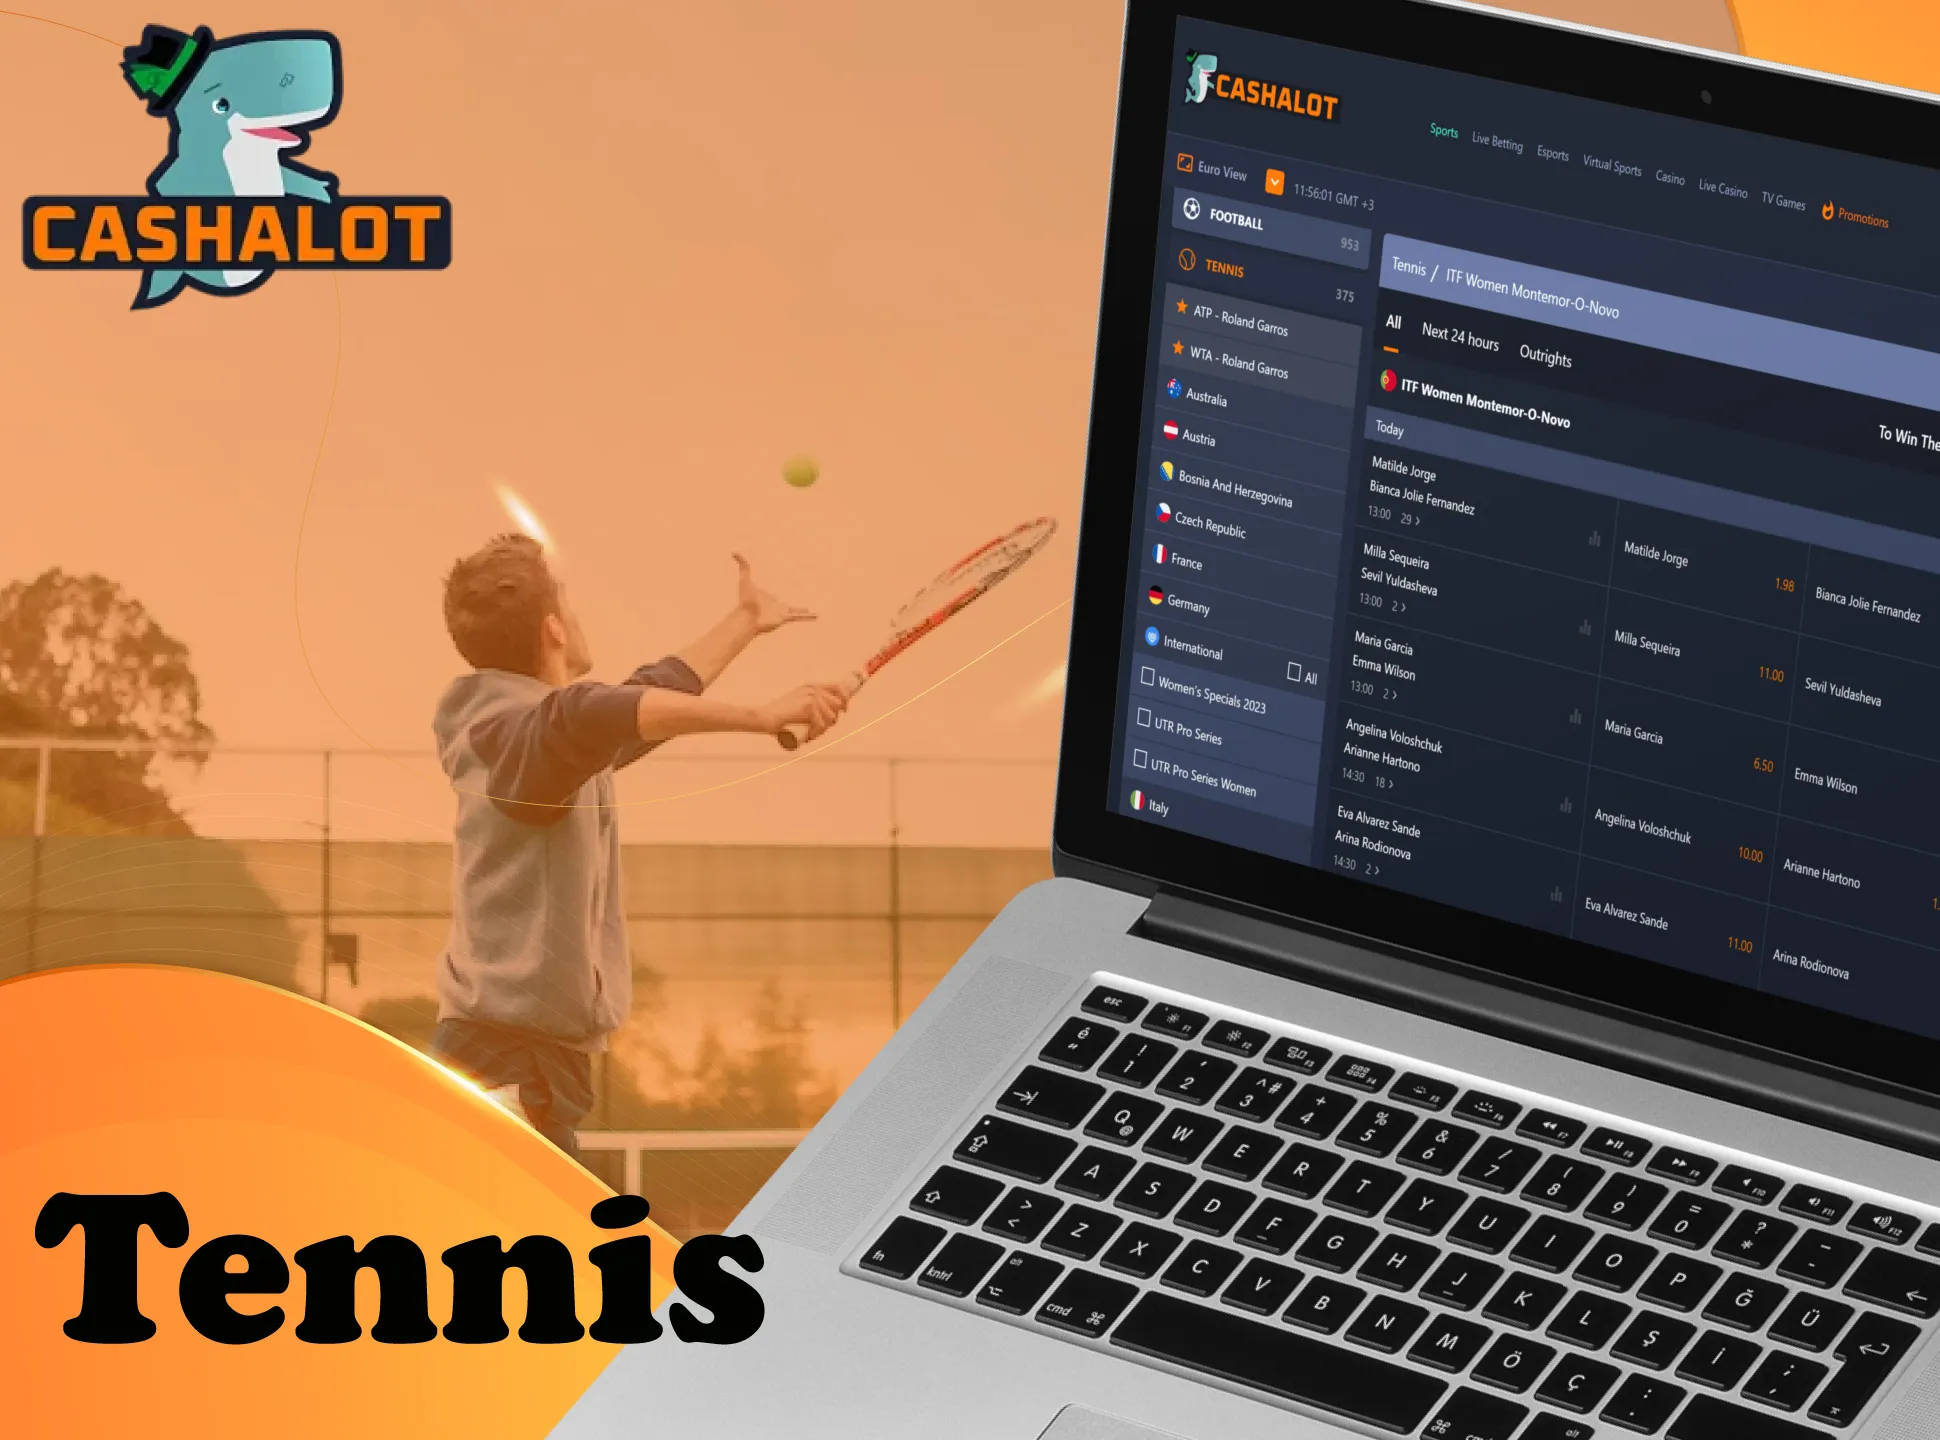 Bet on legendary tennis players at Cashalot.